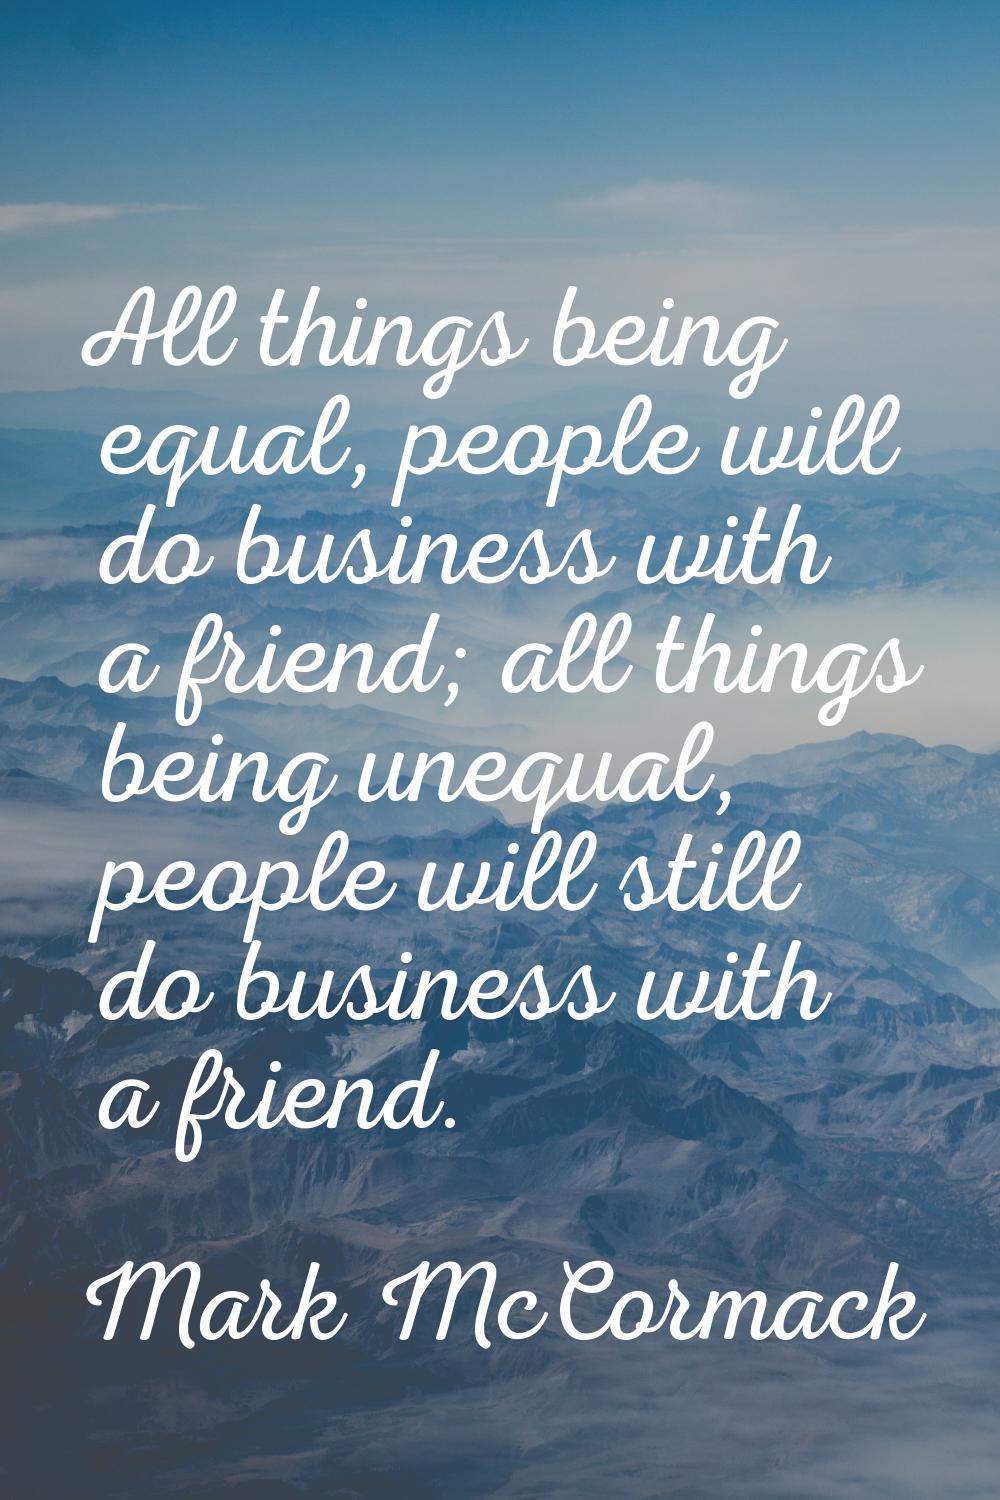 All things being equal, people will do business with a friend; all things being unequal, people wil